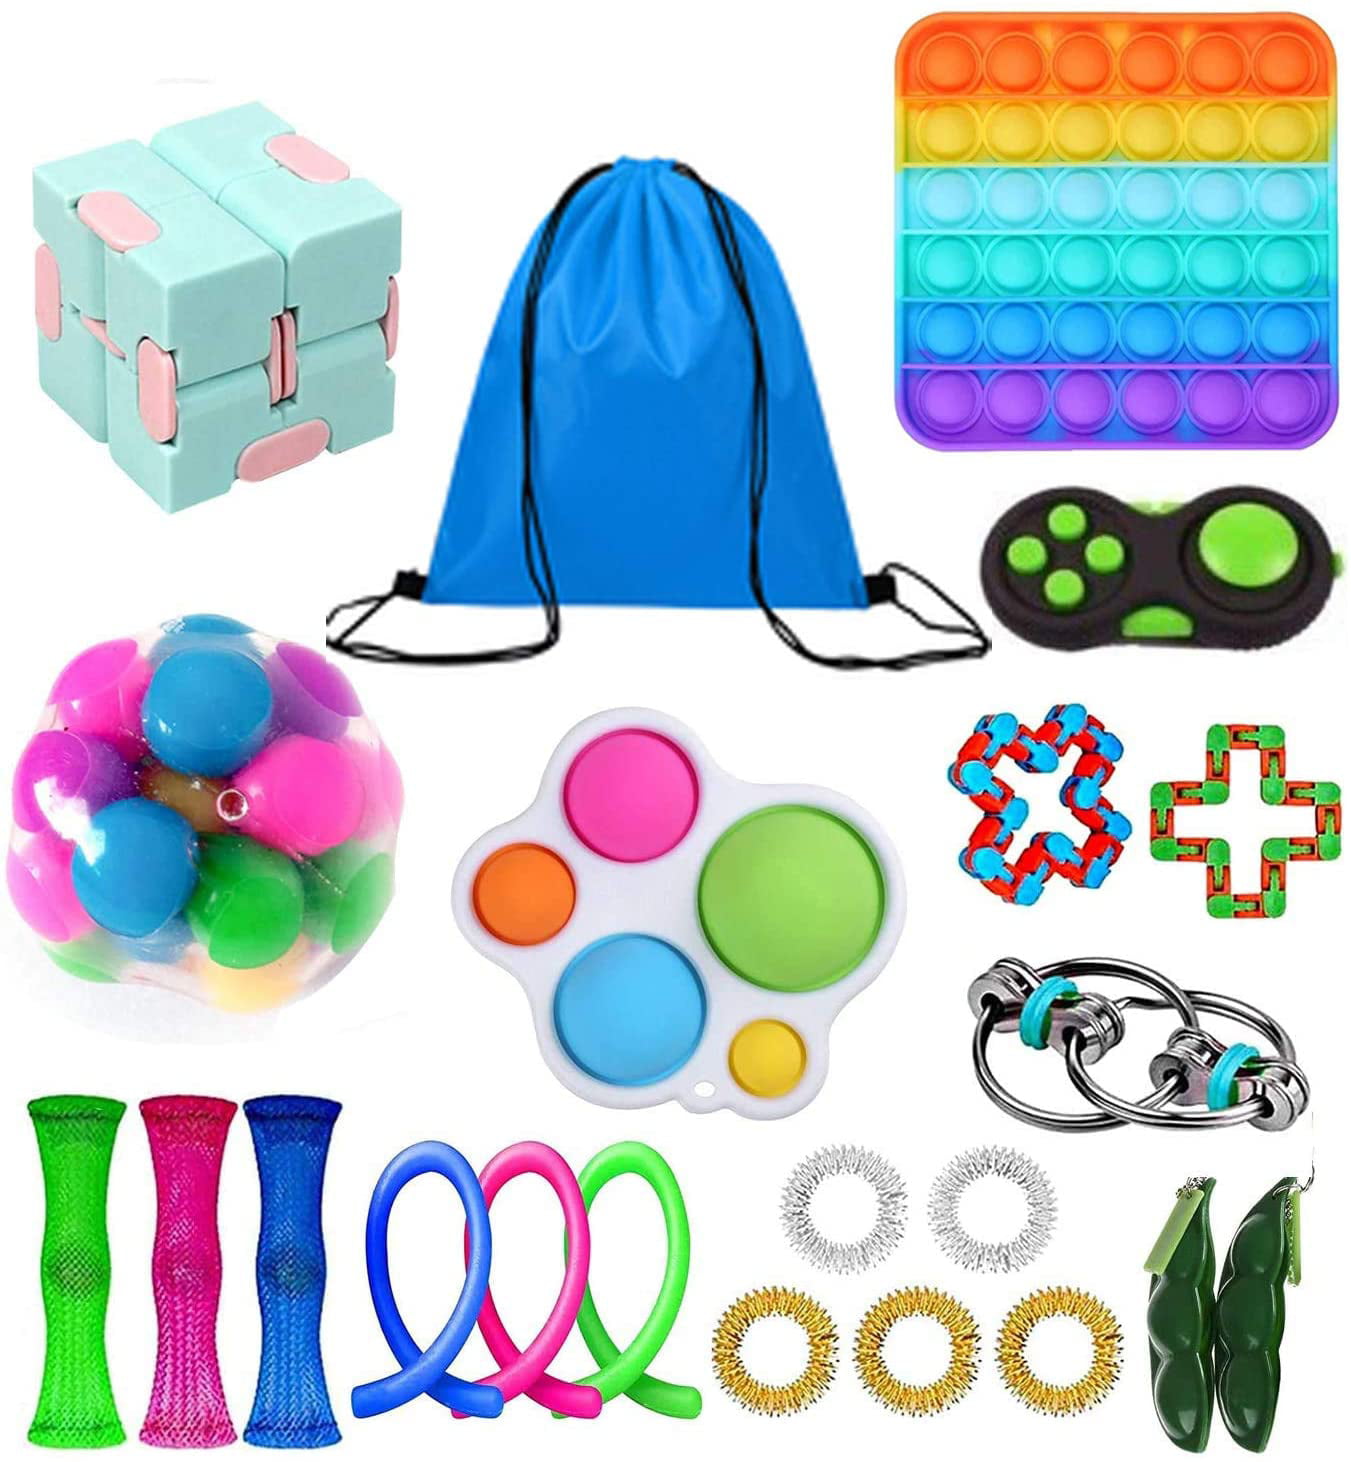 Anditoy 48 Pack Sensory Fidget Toys Set Fidget Pack with Pop Toys Mini Pop Dimple Sensory Toys for Kids Girls Boys Adults Stress Relief Party Favors